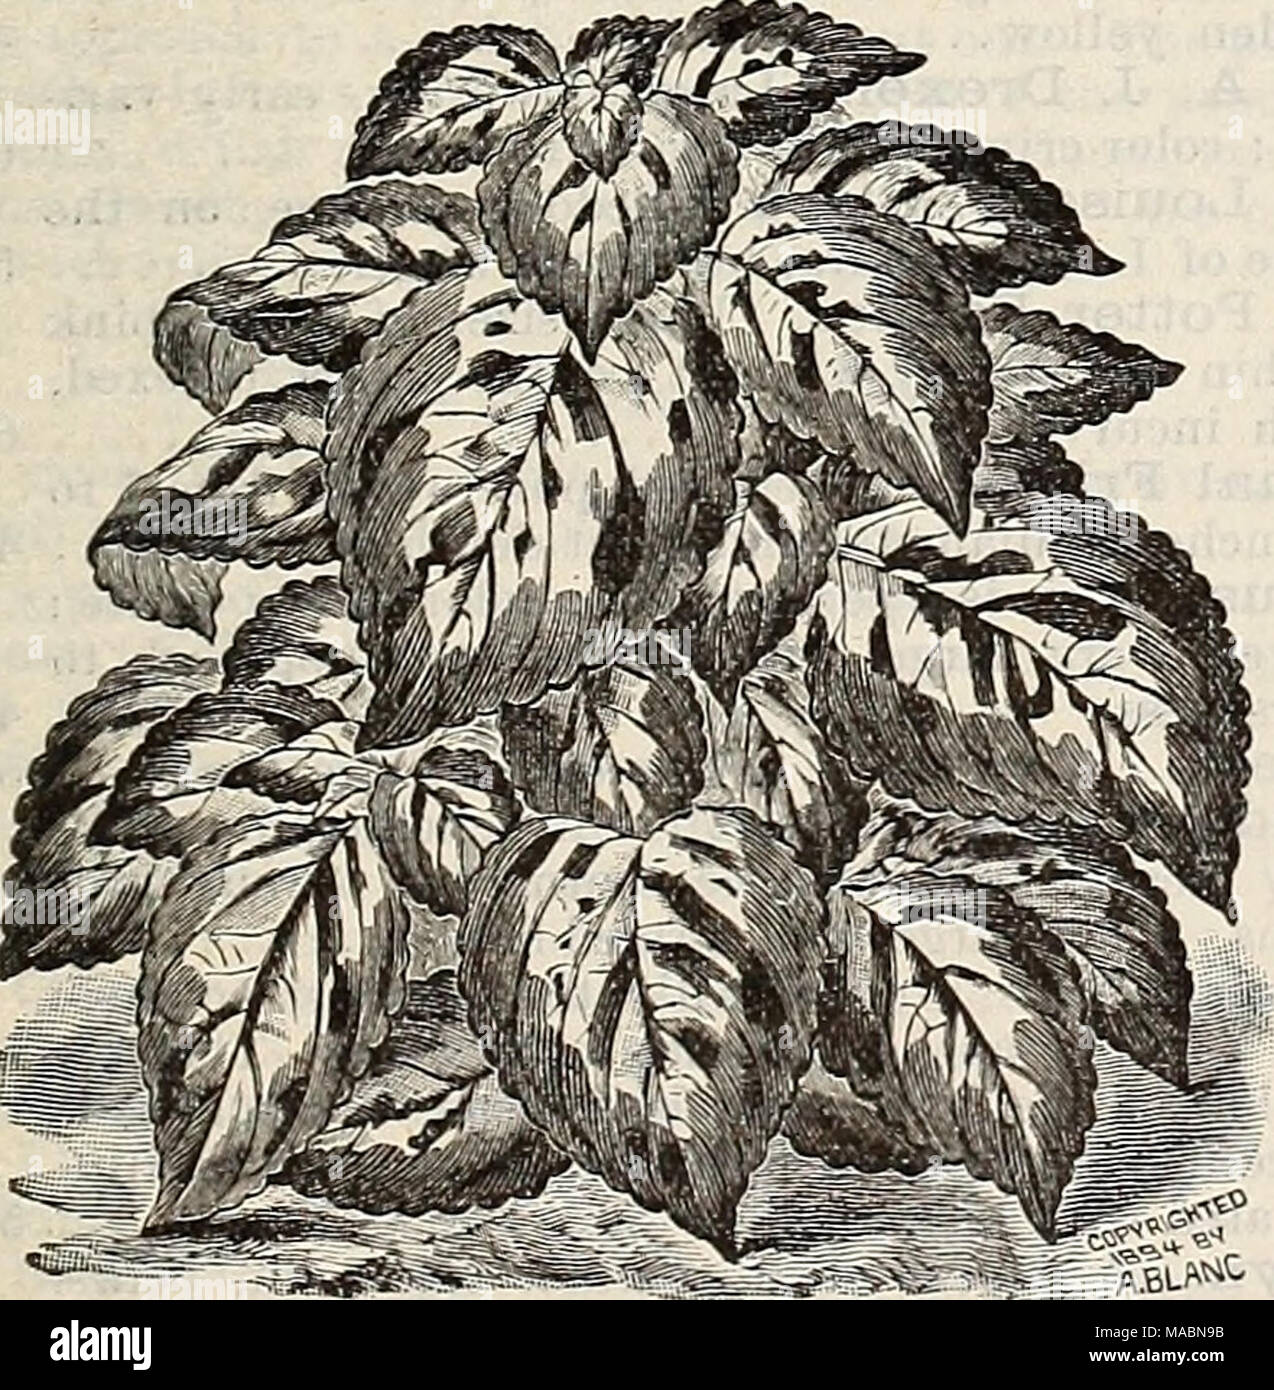 . Dreer's quarterly wholesale price list of seeds, plants &amp;c. : spring edition April 1896 June . JSi-w (Joleus, Mrs. F. Sander Coleus, Mrs. F. Sander. This splendid new Coleus differs from all other varieties in having a wedge of creamy white in the centre of the leaf, with a clearly defined margin of oxide green, bronze, crimson and purple. It is the most beautiful and distinct variety yet raised. 60 cents per dozen ; $5.00 per 100. Cissus Discolor. Strong 2 inch pots of this beautiful climber, dozen ; $8.00 per 100. LOO per Crotons. We offer 10 choice varieties in good young plants. per  Stock Photo